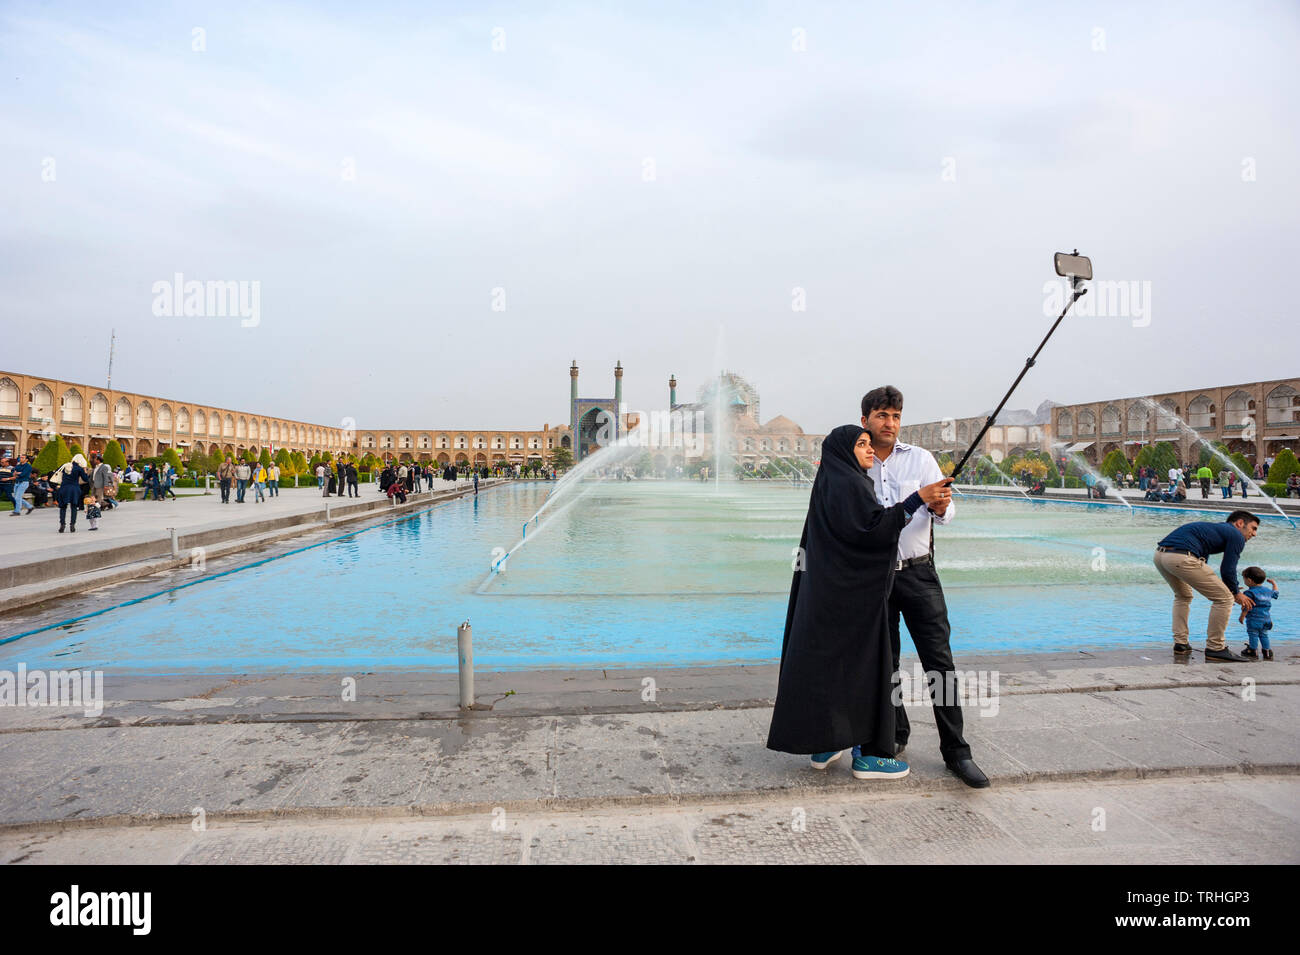 Tourists taking a selfie at Maydan-e Imam Square, also known as Naqsh-e Jahan Square, in Esfahan, Iran. It is a UNESCO World Heritage Site. Stock Photo